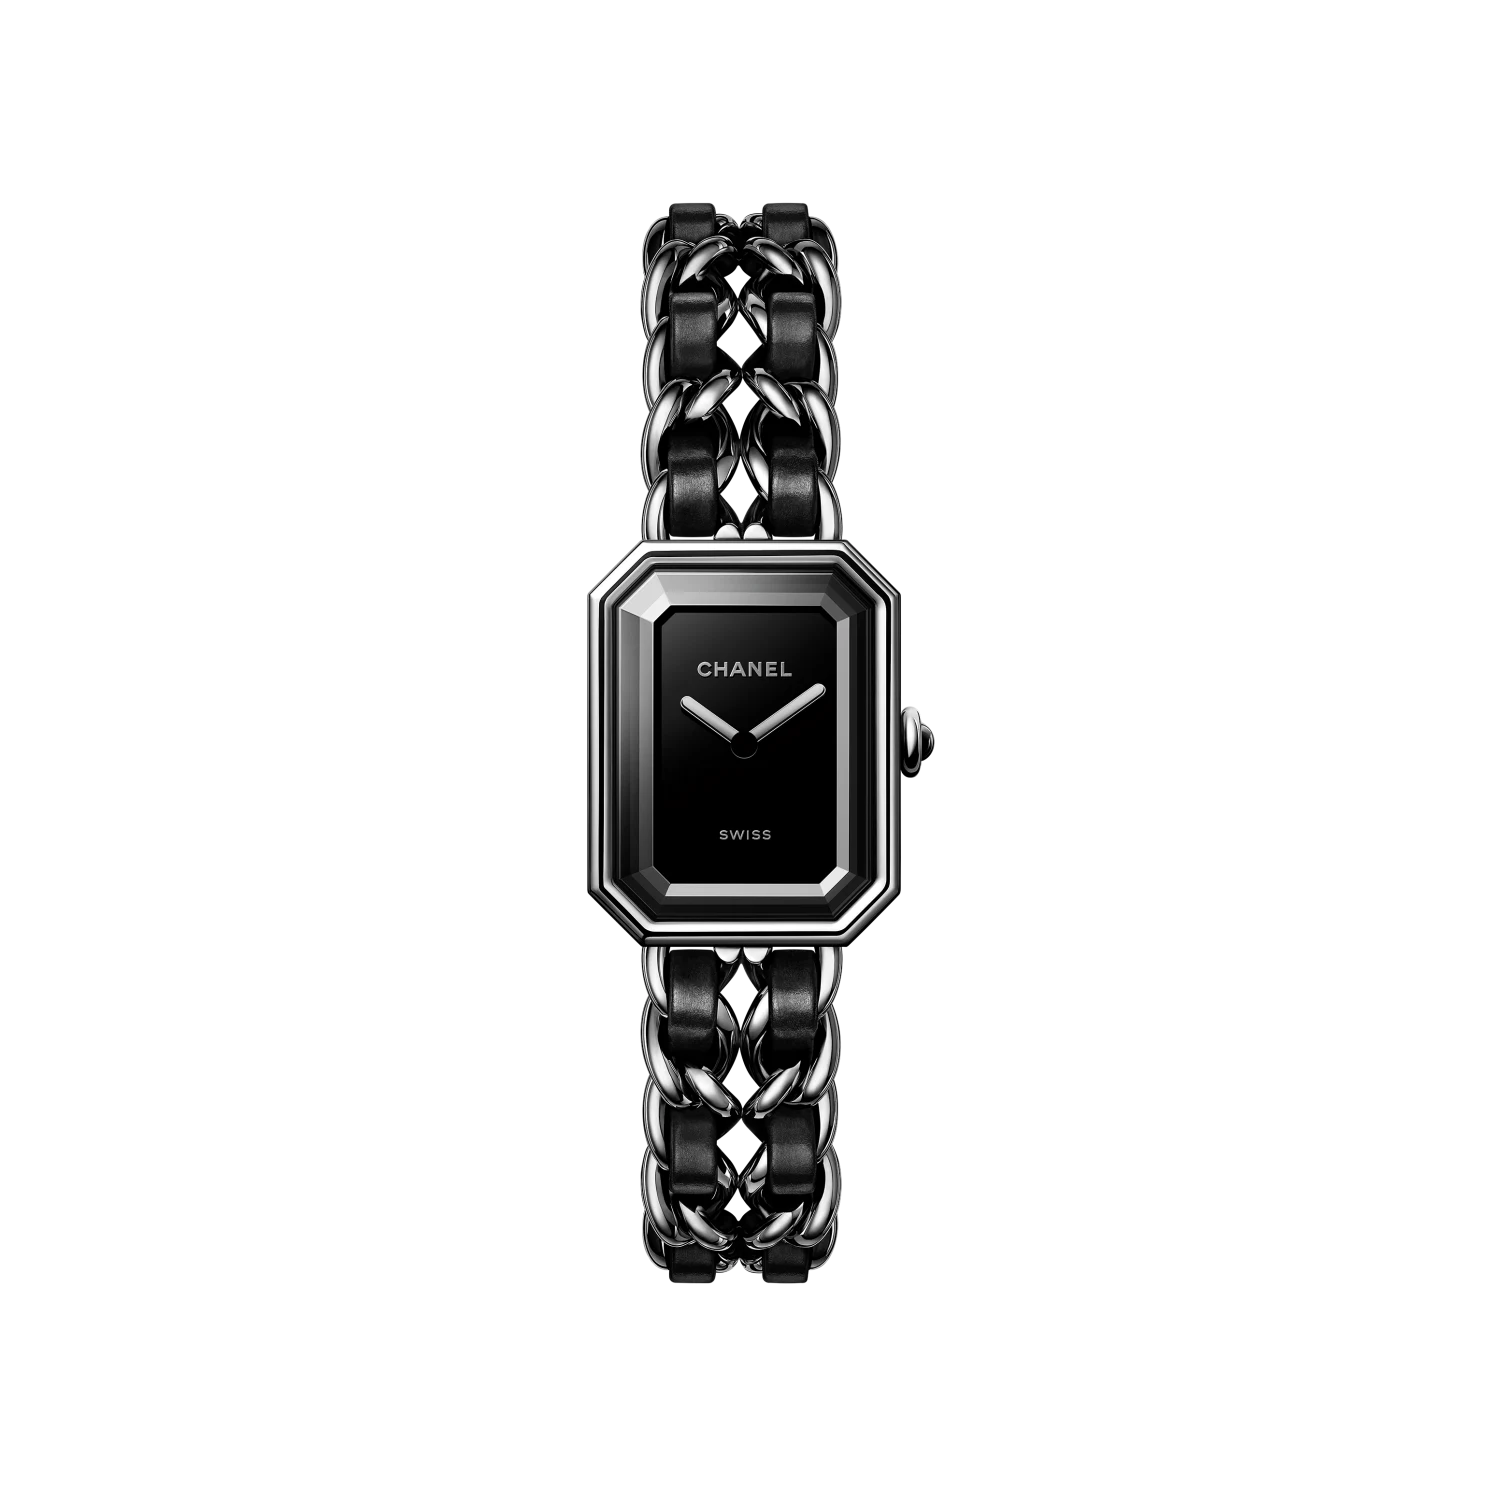 Chanel Première Iconic Chain Watch